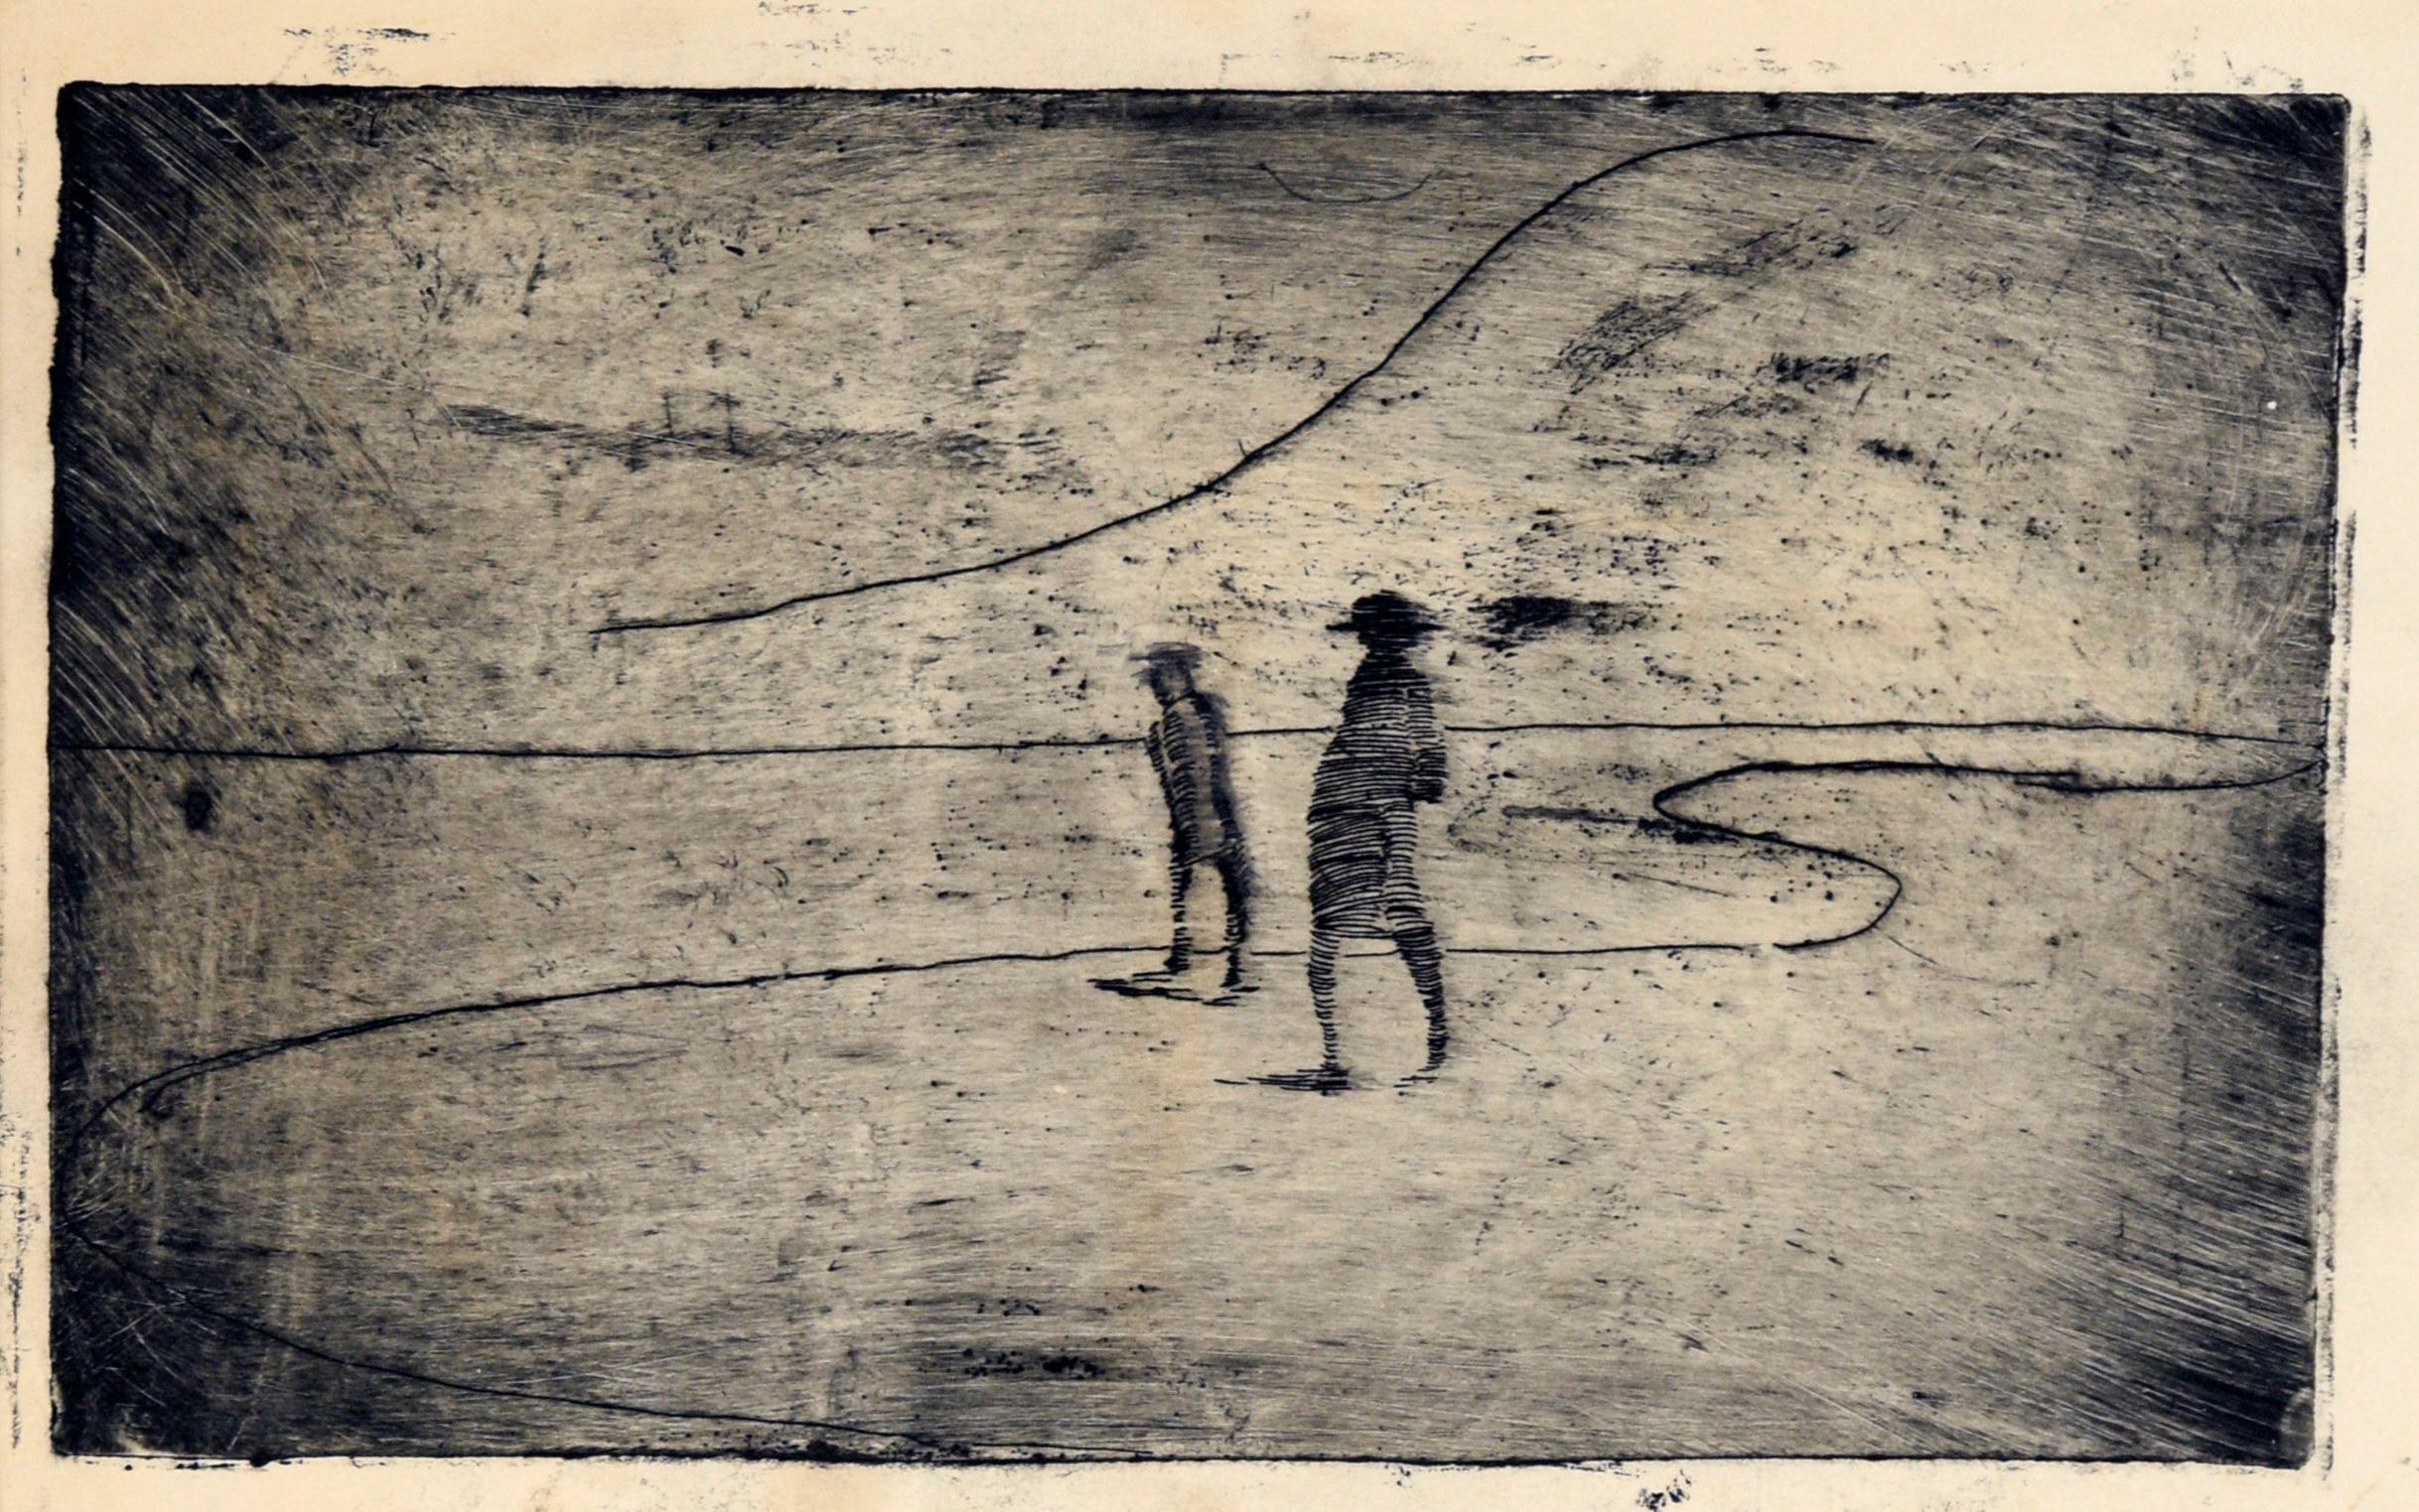 Two Figures on the Shore - Minimalist Landscape Drypoint Etching in Ink on Paper - Print by Doris Warner